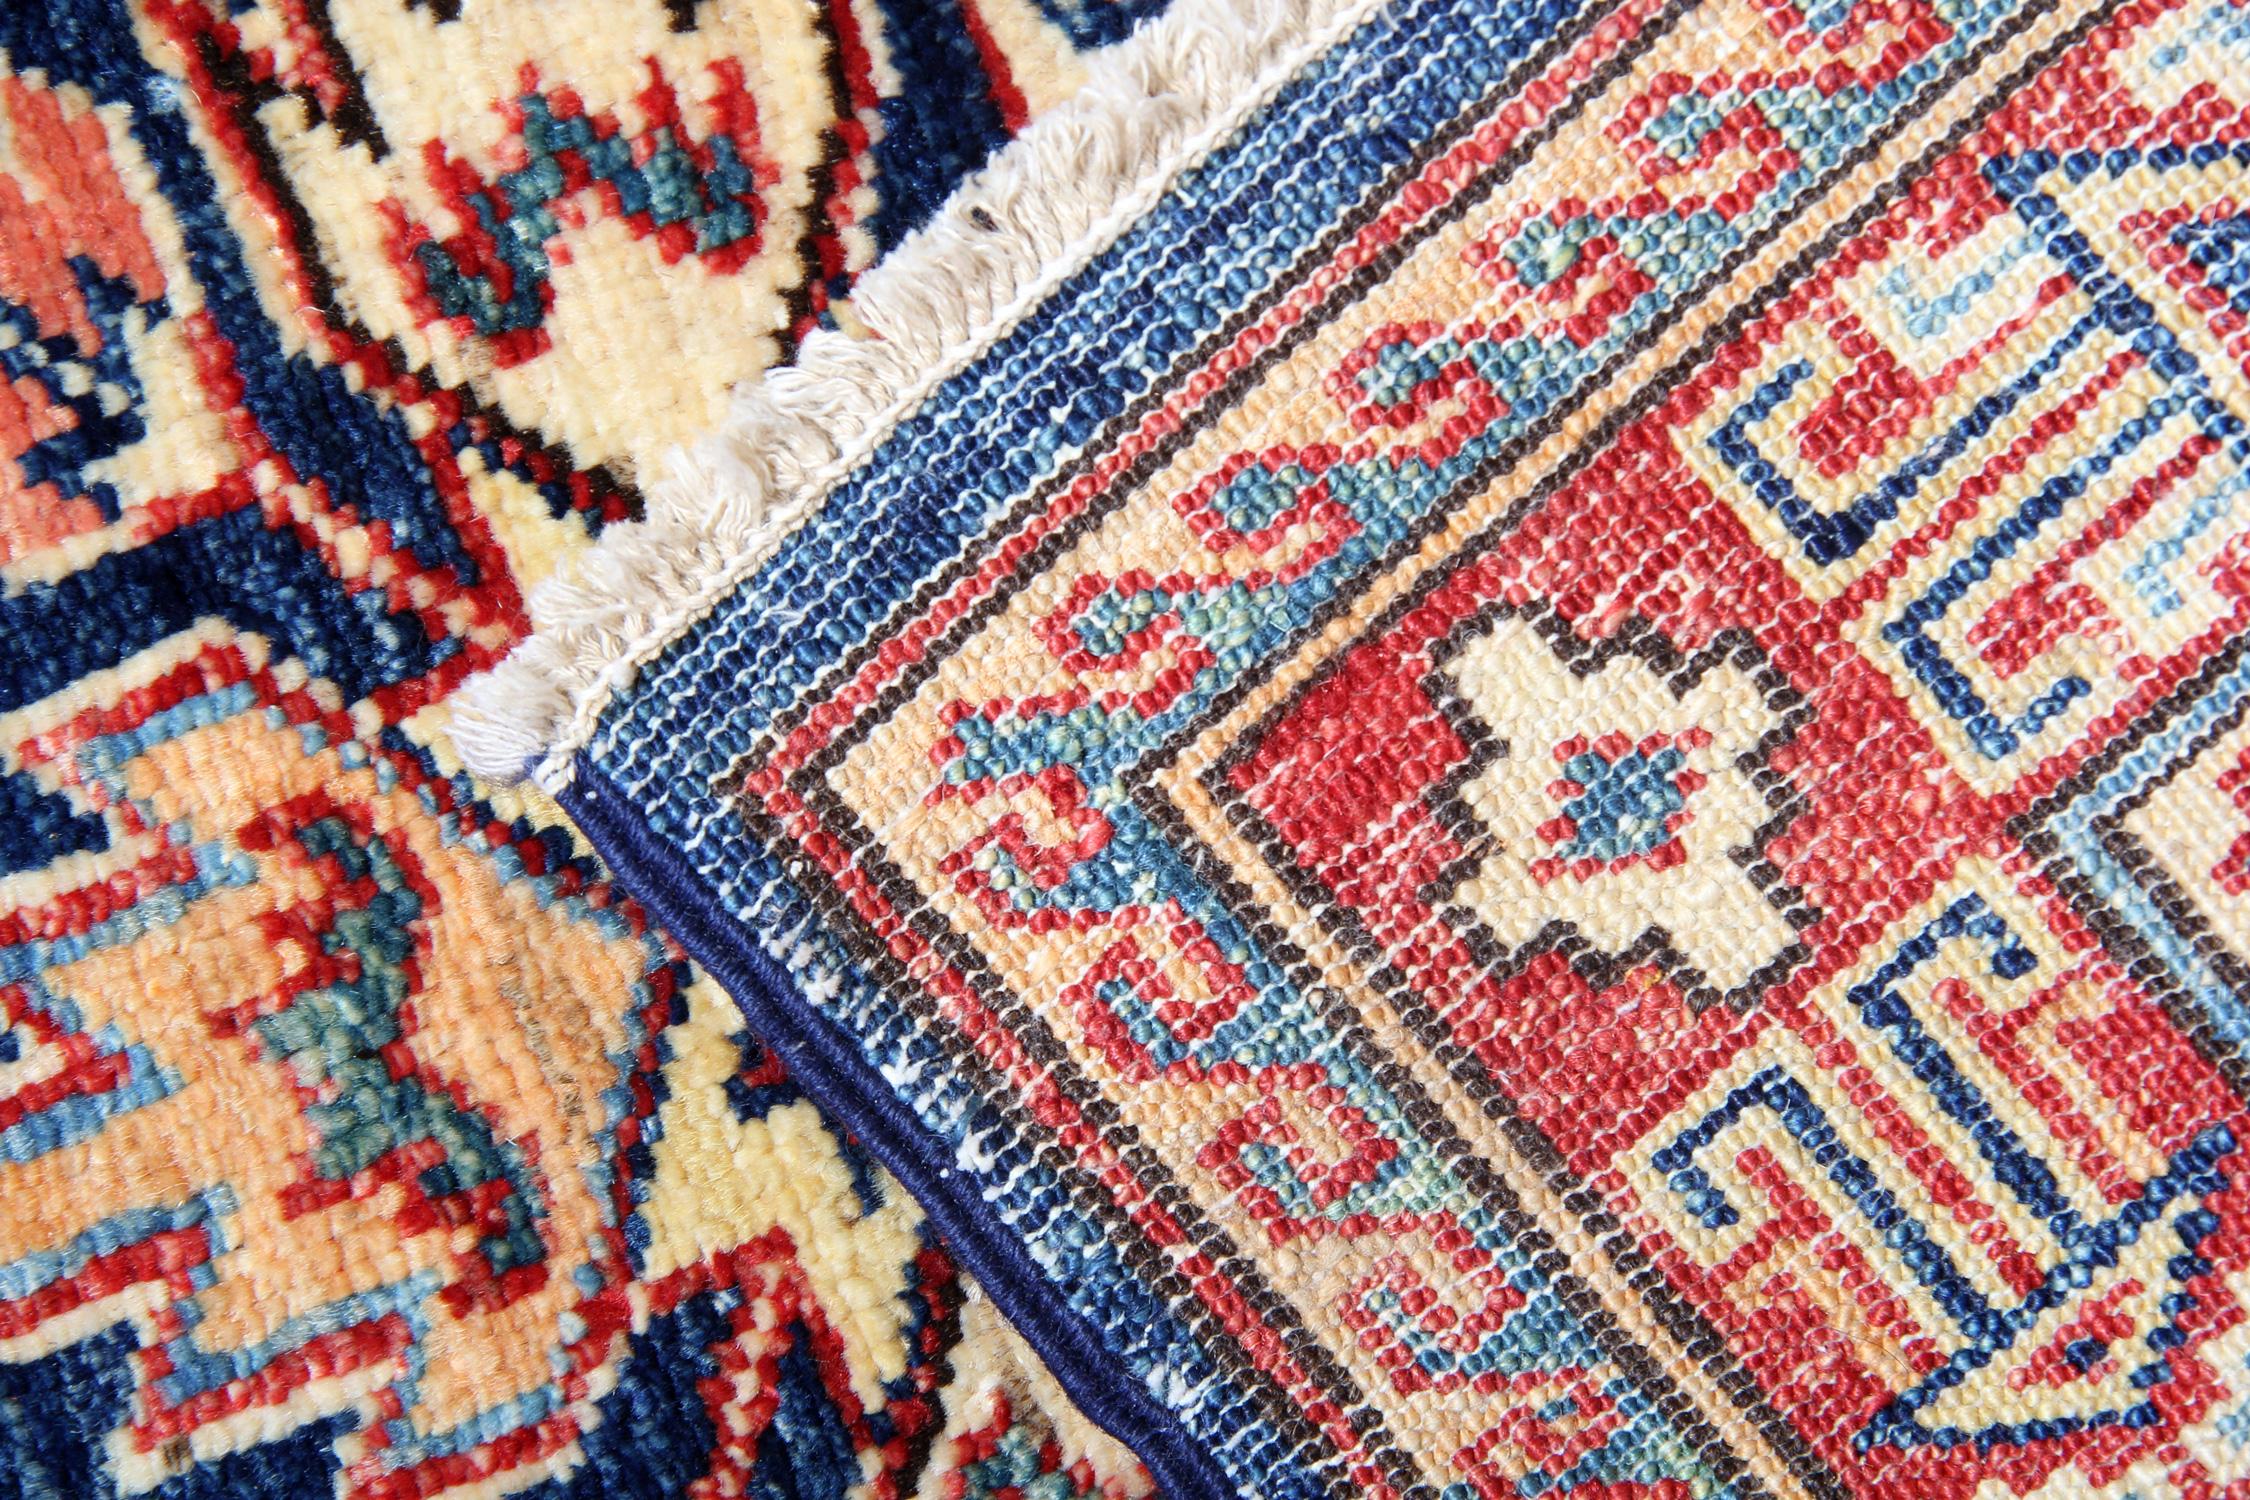 A beautiful new traditional Afghan Kazak rug features three conventional tribal medallions woven in accents of red, orange, and cream through the centre of a navy-blue field. The geometric rug design is then finished with a highly-detailed repeat